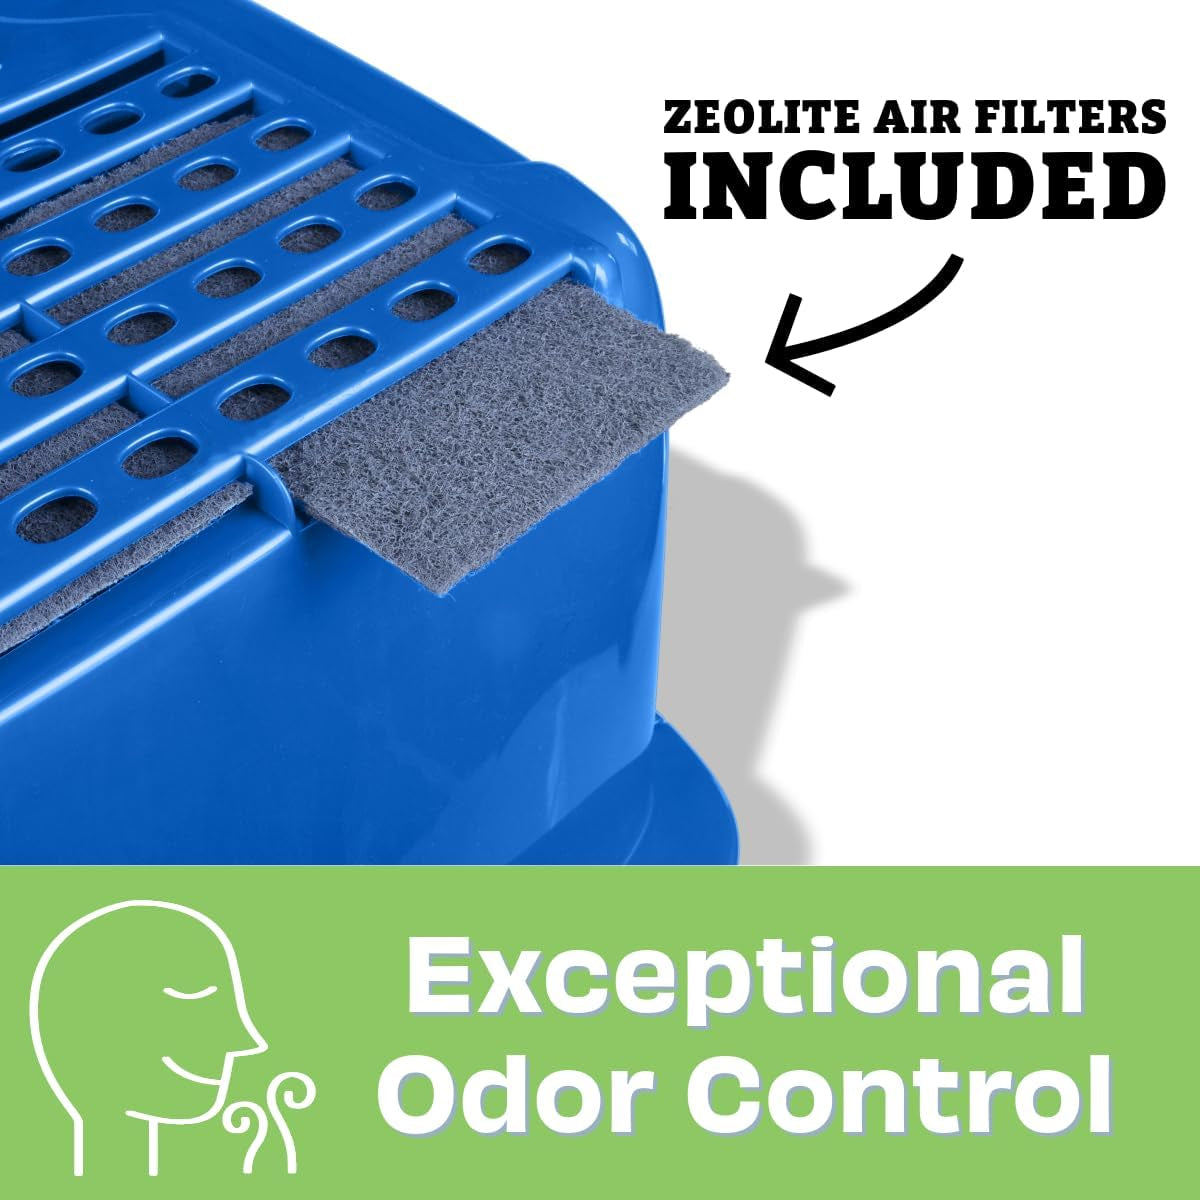 Pets Odor Control Extra Large, Giant Enclosed Cat Pan with Odor Door, Hooded, Blue, CP7